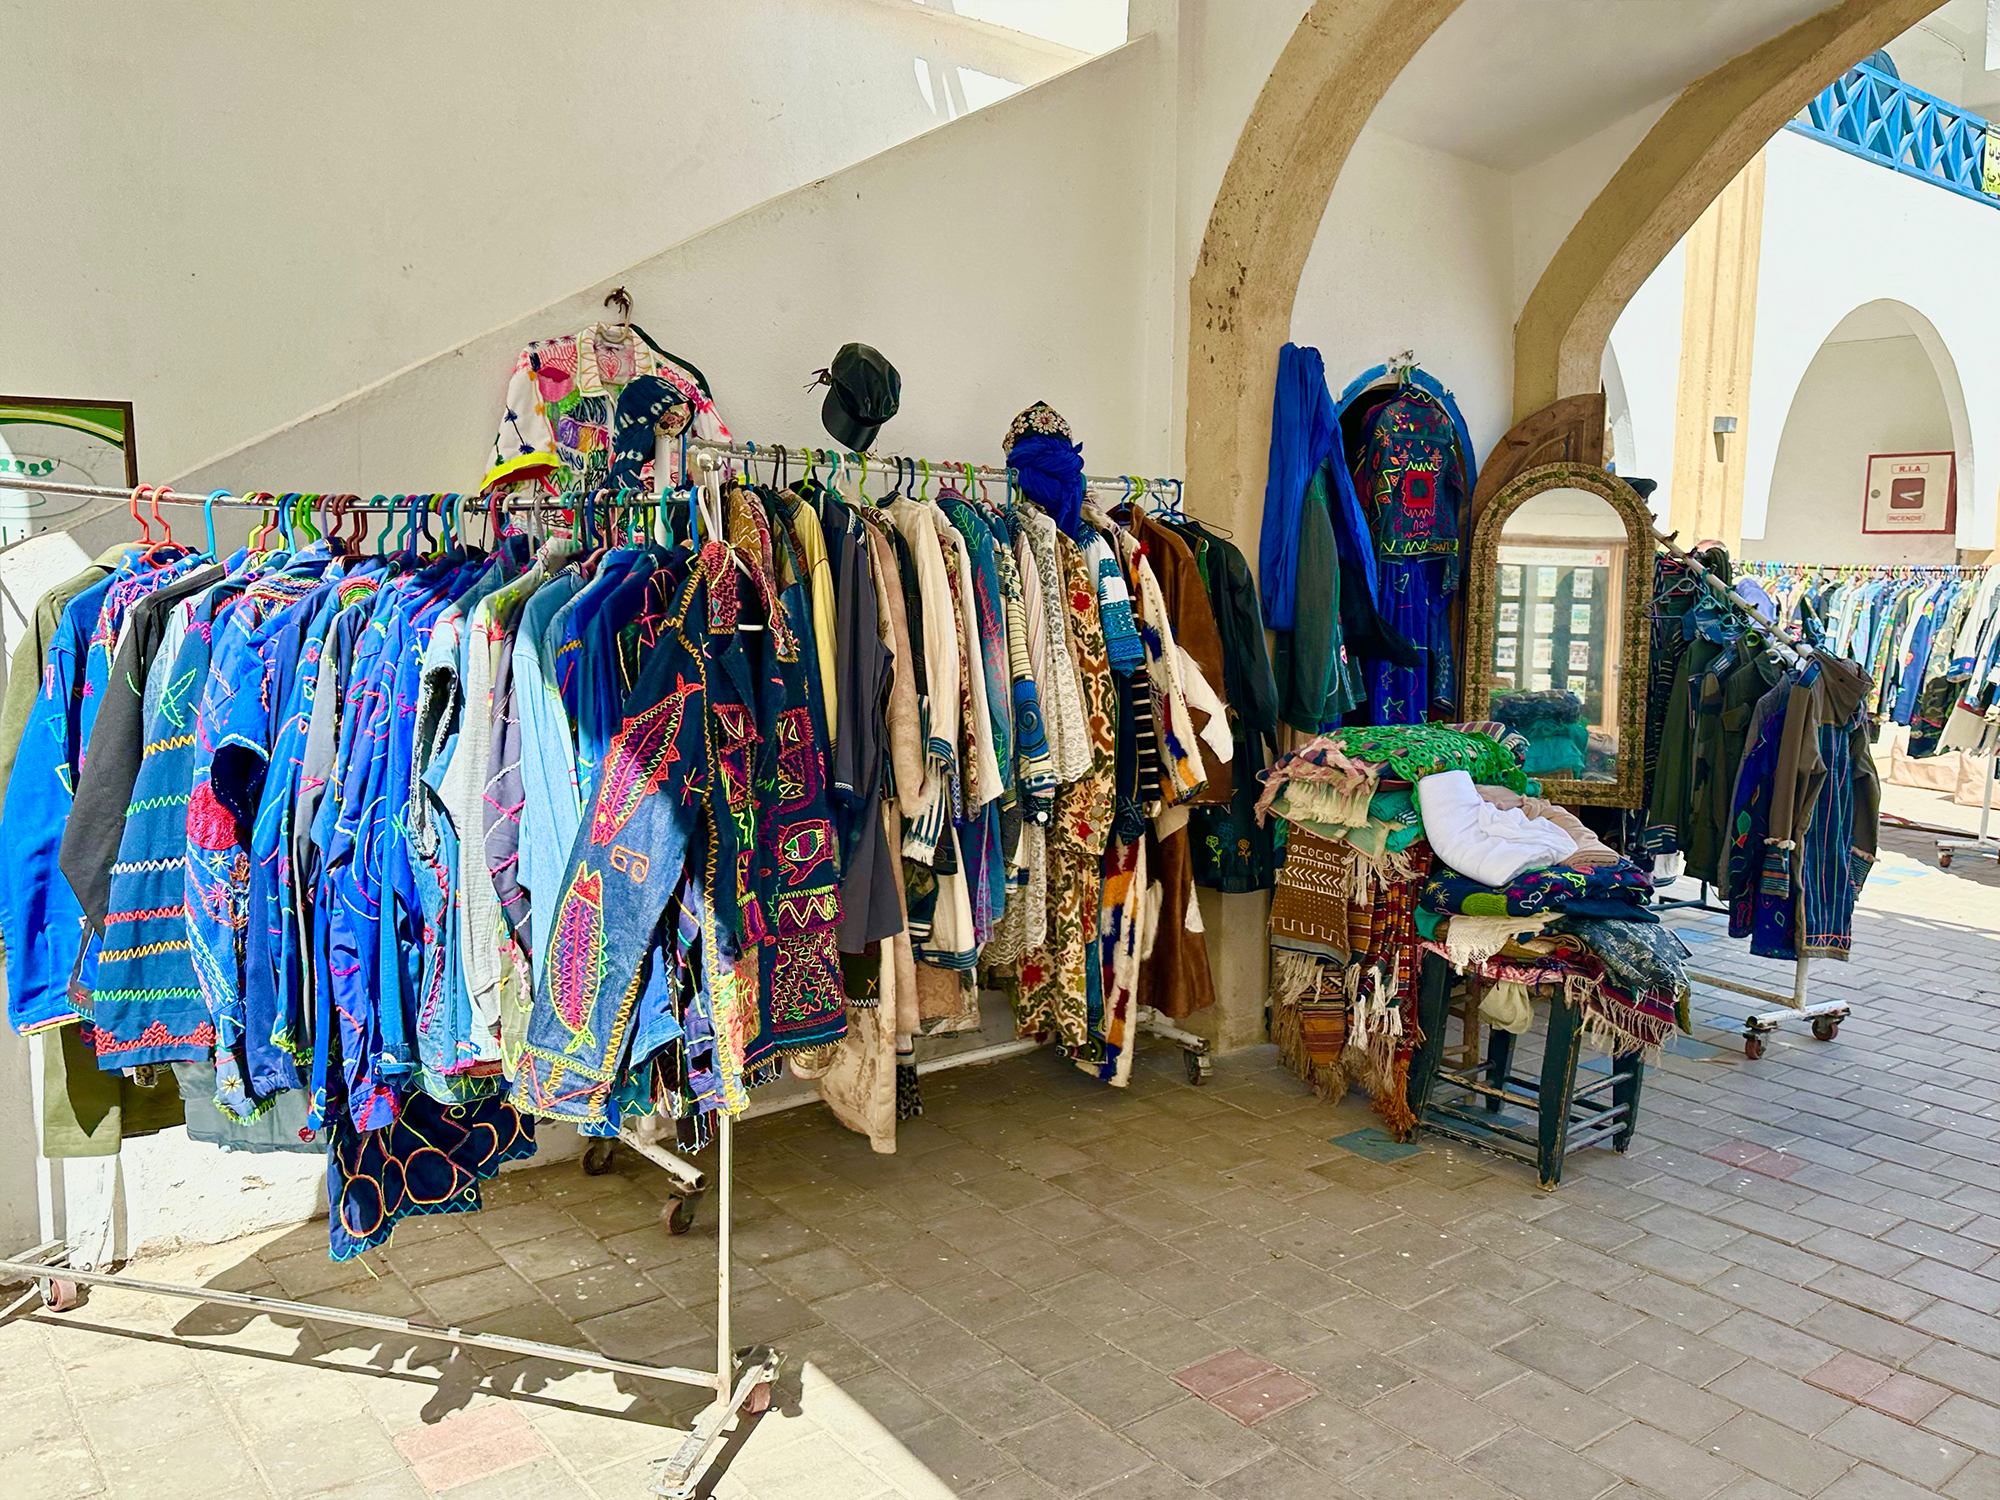 Euphoric Threads Travel Blog - Euphoric Escapades - The Adventures of Griffindor - The Ultimate Travel Guide to Shopping in Morocco. Essaouria shopping guide